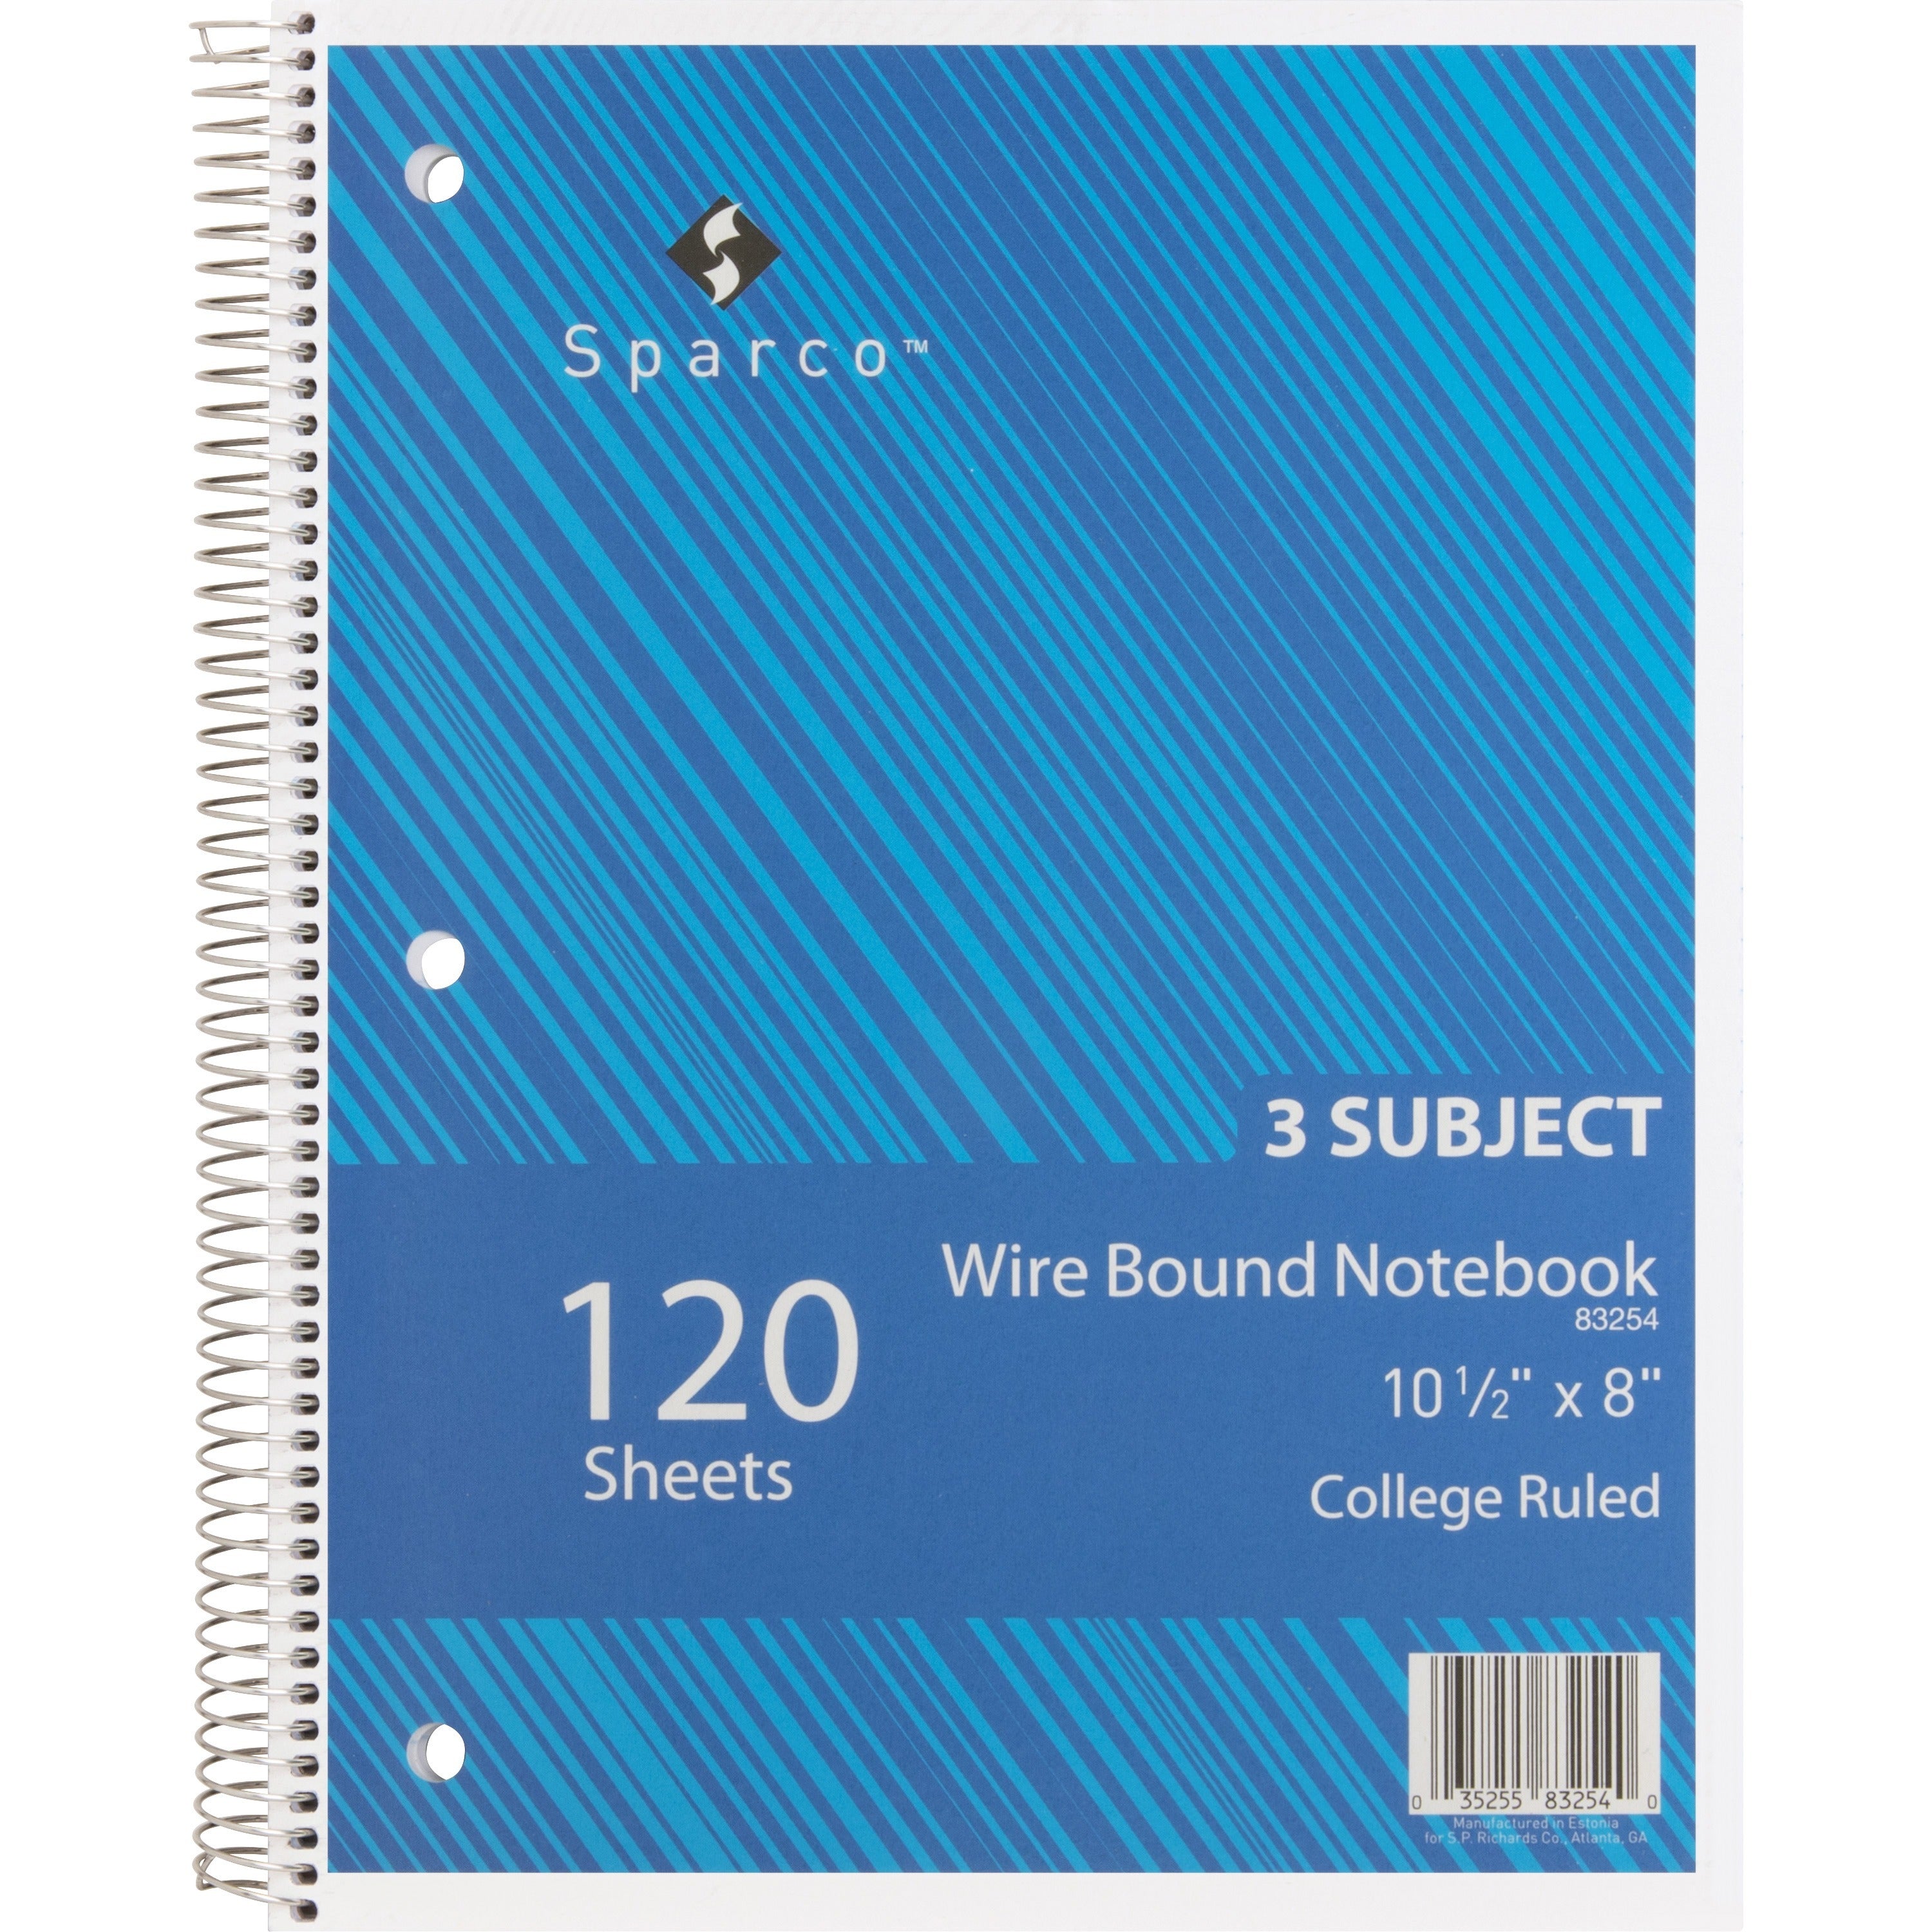 Sparco Wirebound College Ruled Notebooks - 120 Sheets - Wire Bound - College Ruled - Unruled Margin - 16 lb Basis Weight - 8" x 10 1/2" - Assorted Paper - AssortedChipboard Cover - Resist Bleed-through, Subject, Stiff-cover, Stiff-back - 1 Each - 